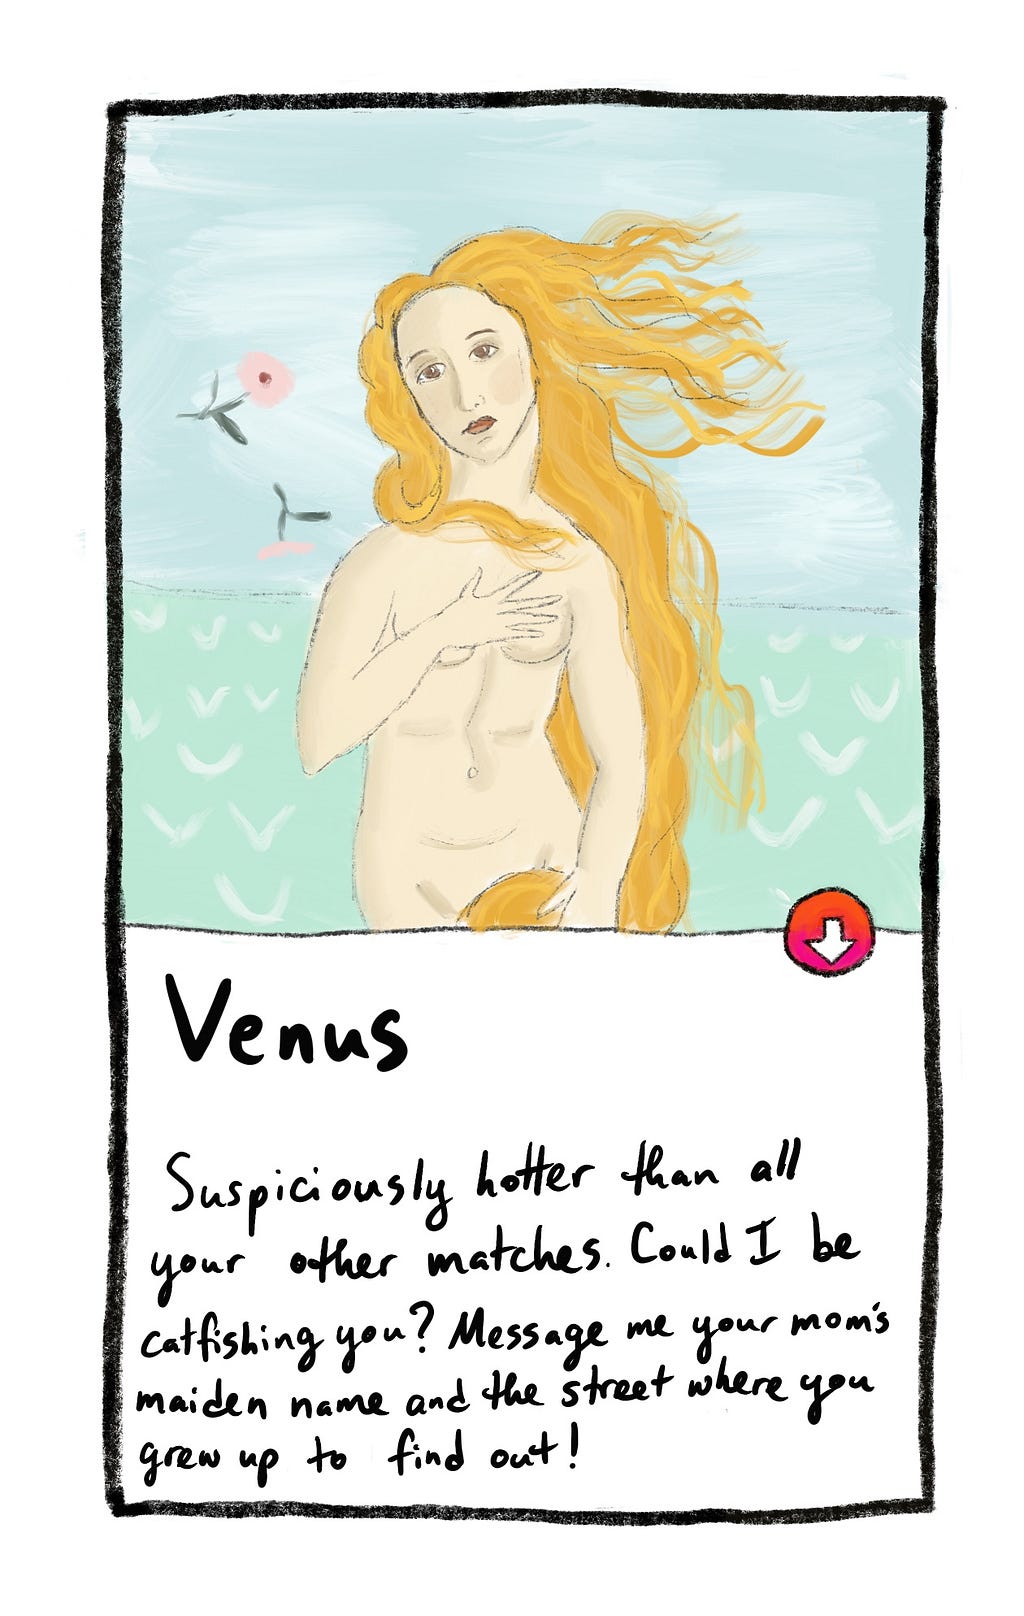 Suspiciously hotter than all your other matches. Could I be catfishing you? — Venus